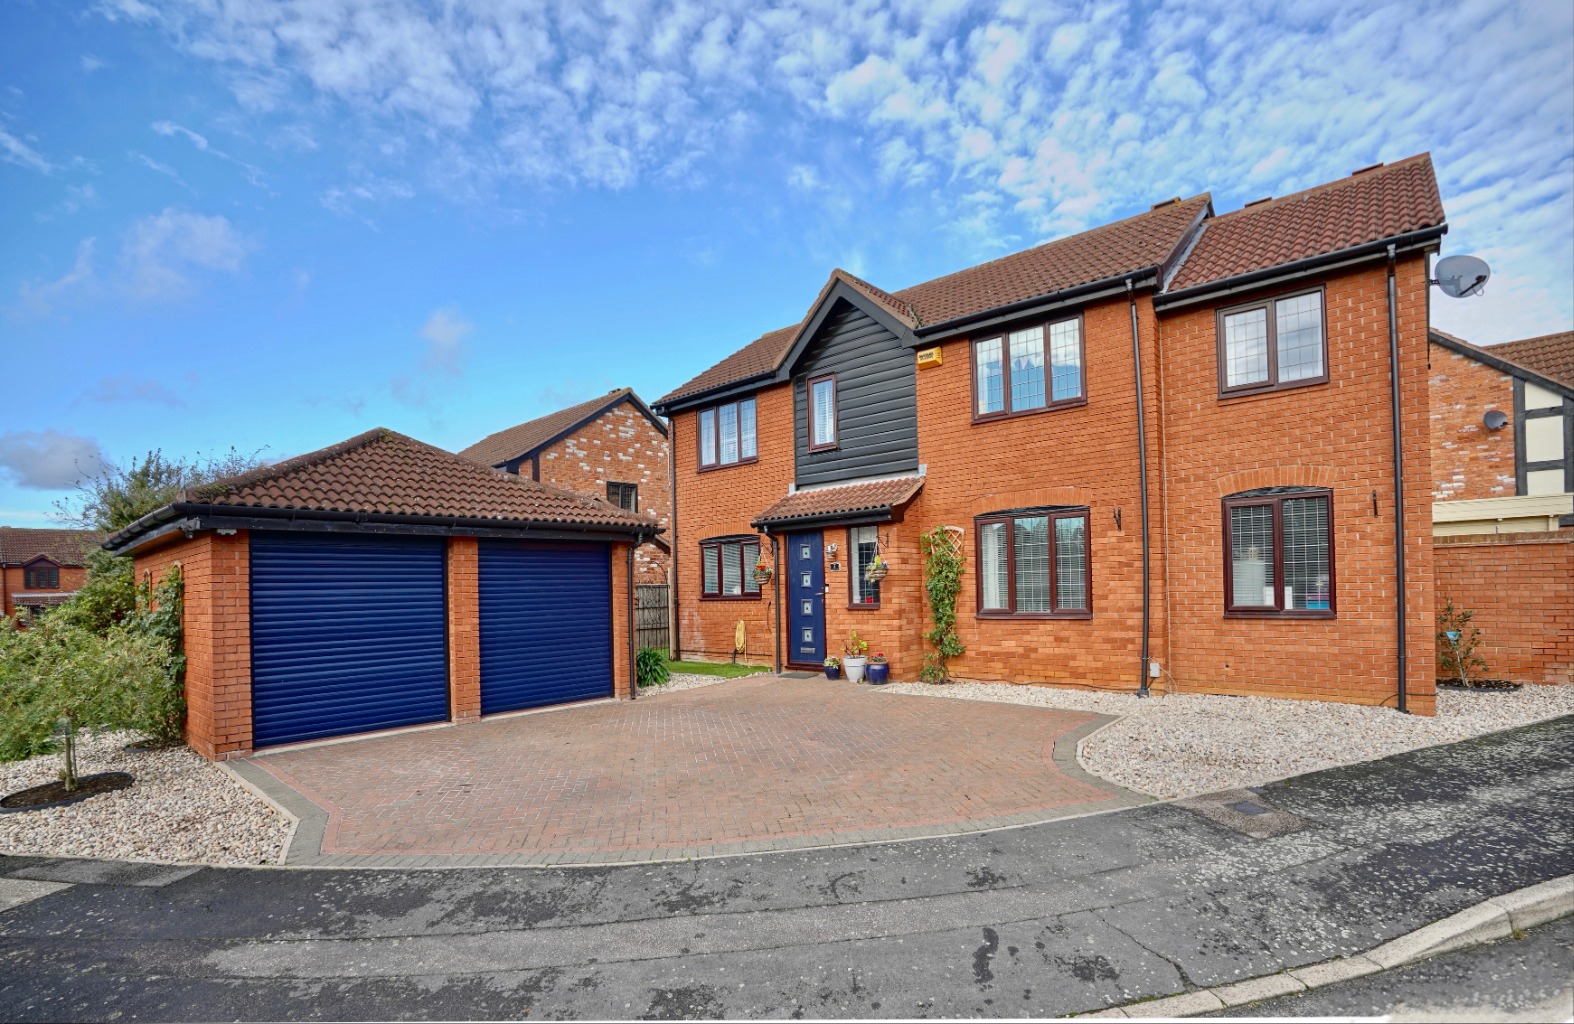 4 bed detached house for sale in Teversham Way, St. Neots 0